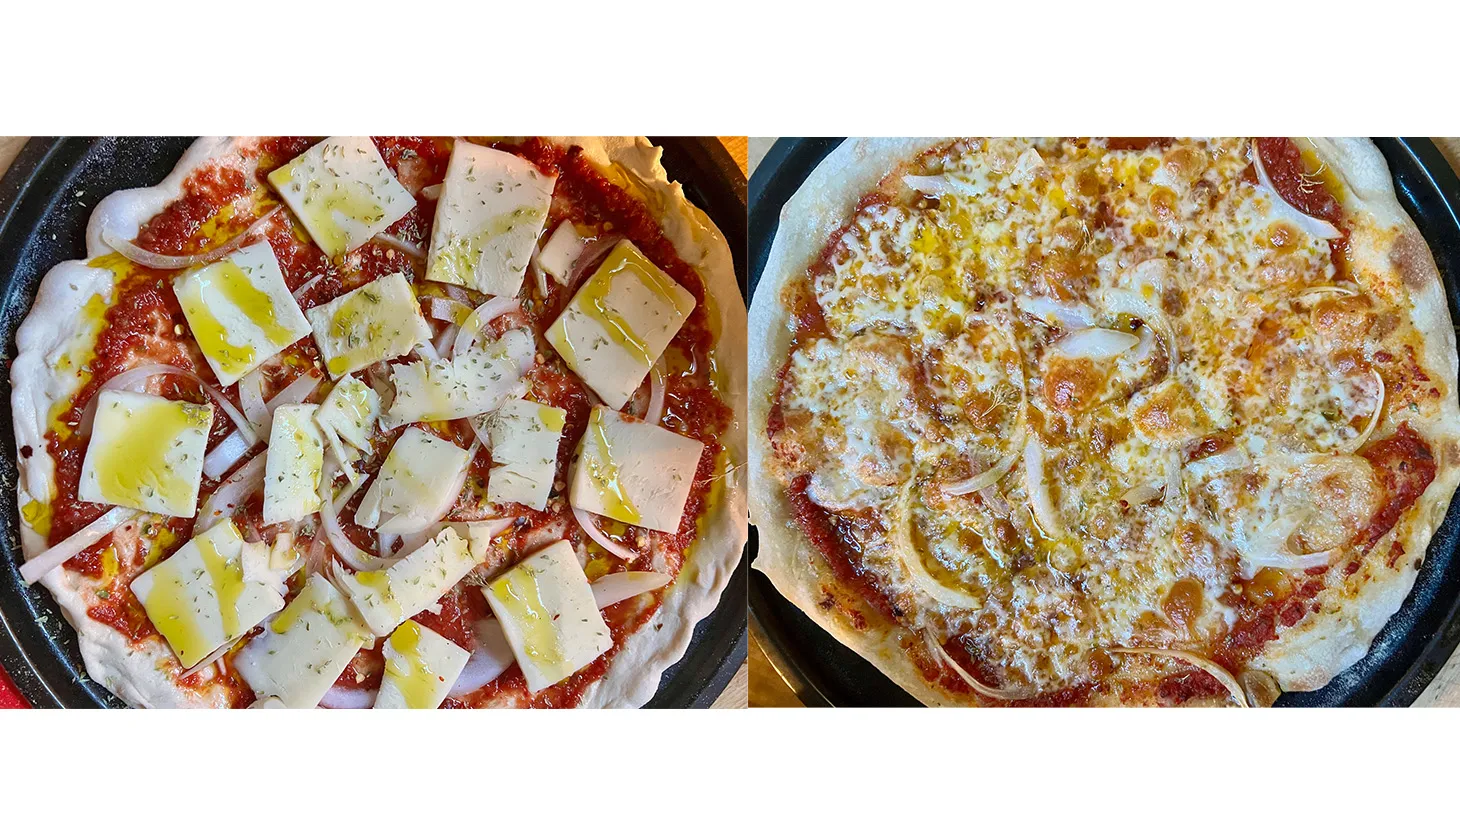 This before-and-after sequence shows pizza cooked in Evan Kleiman’s toaster oven.